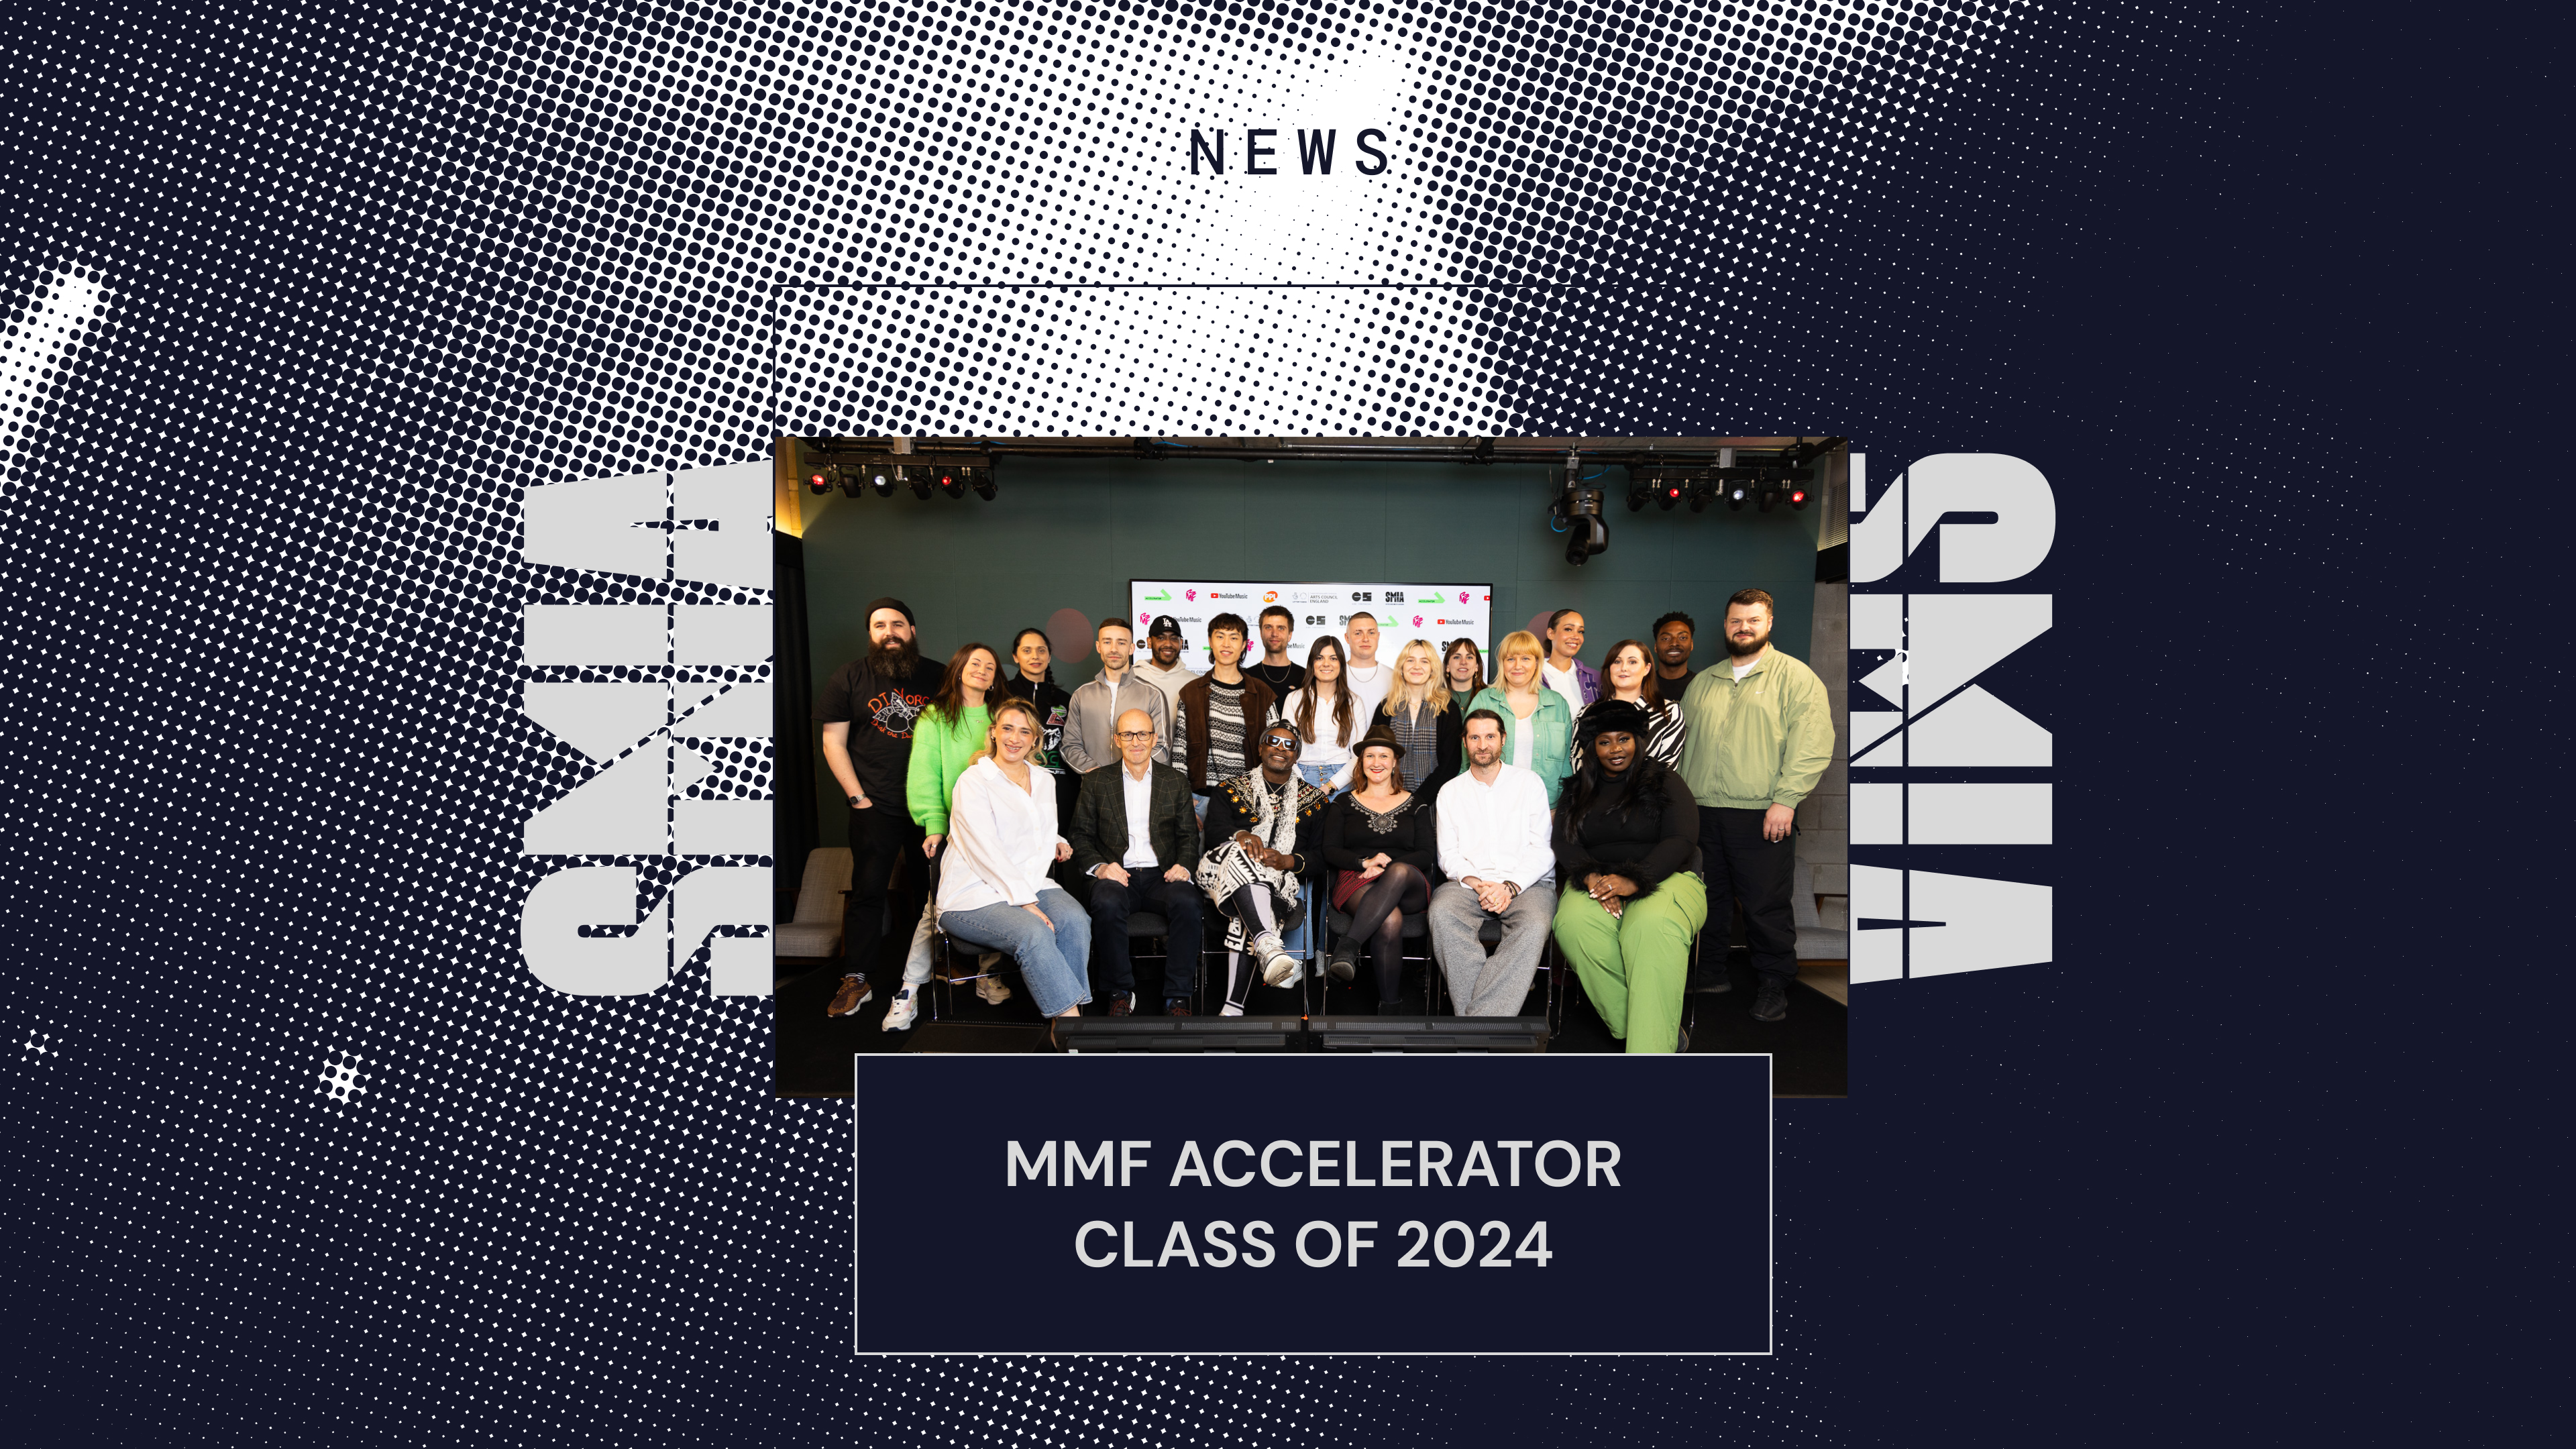 The MMF Accelerator Class of 2024 Is Here